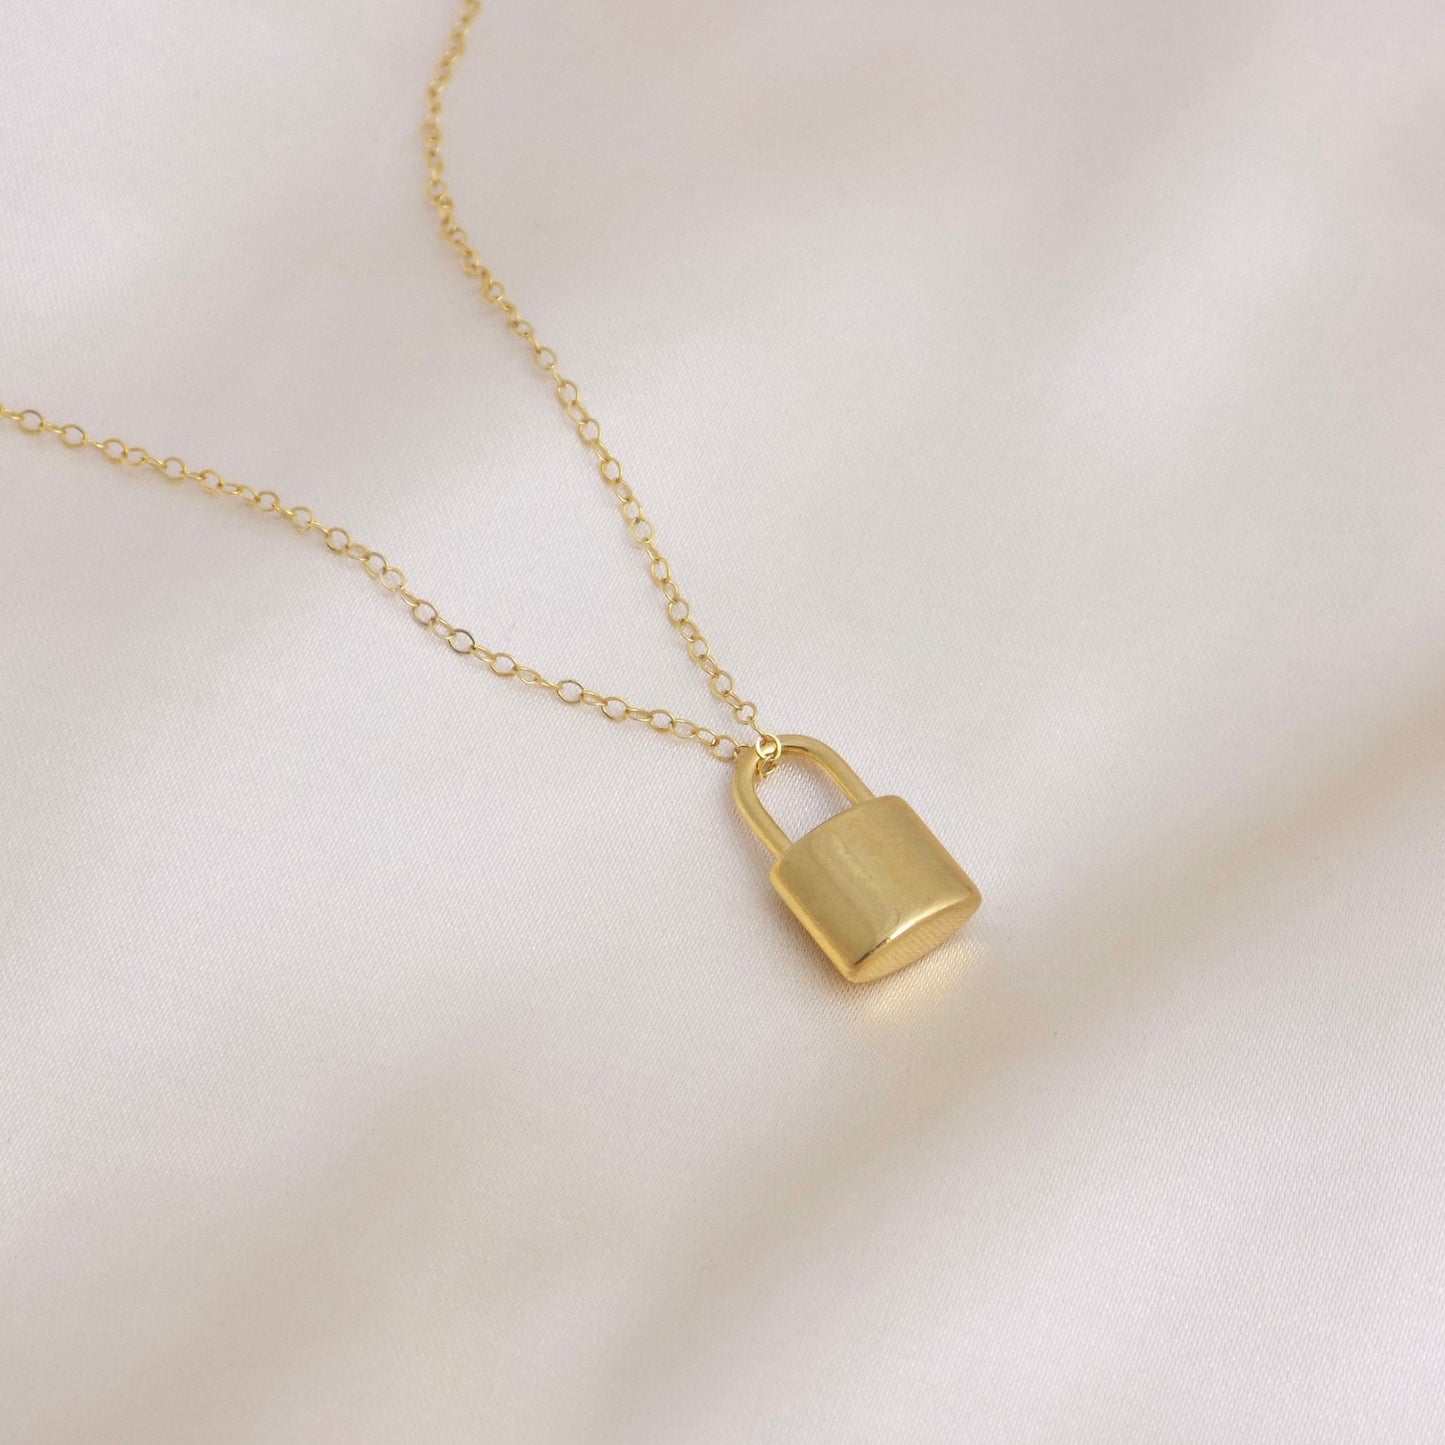 Gold Lock Charm Necklace For Layering, Trendy Modern Layers, Gifts For Her, M6-134